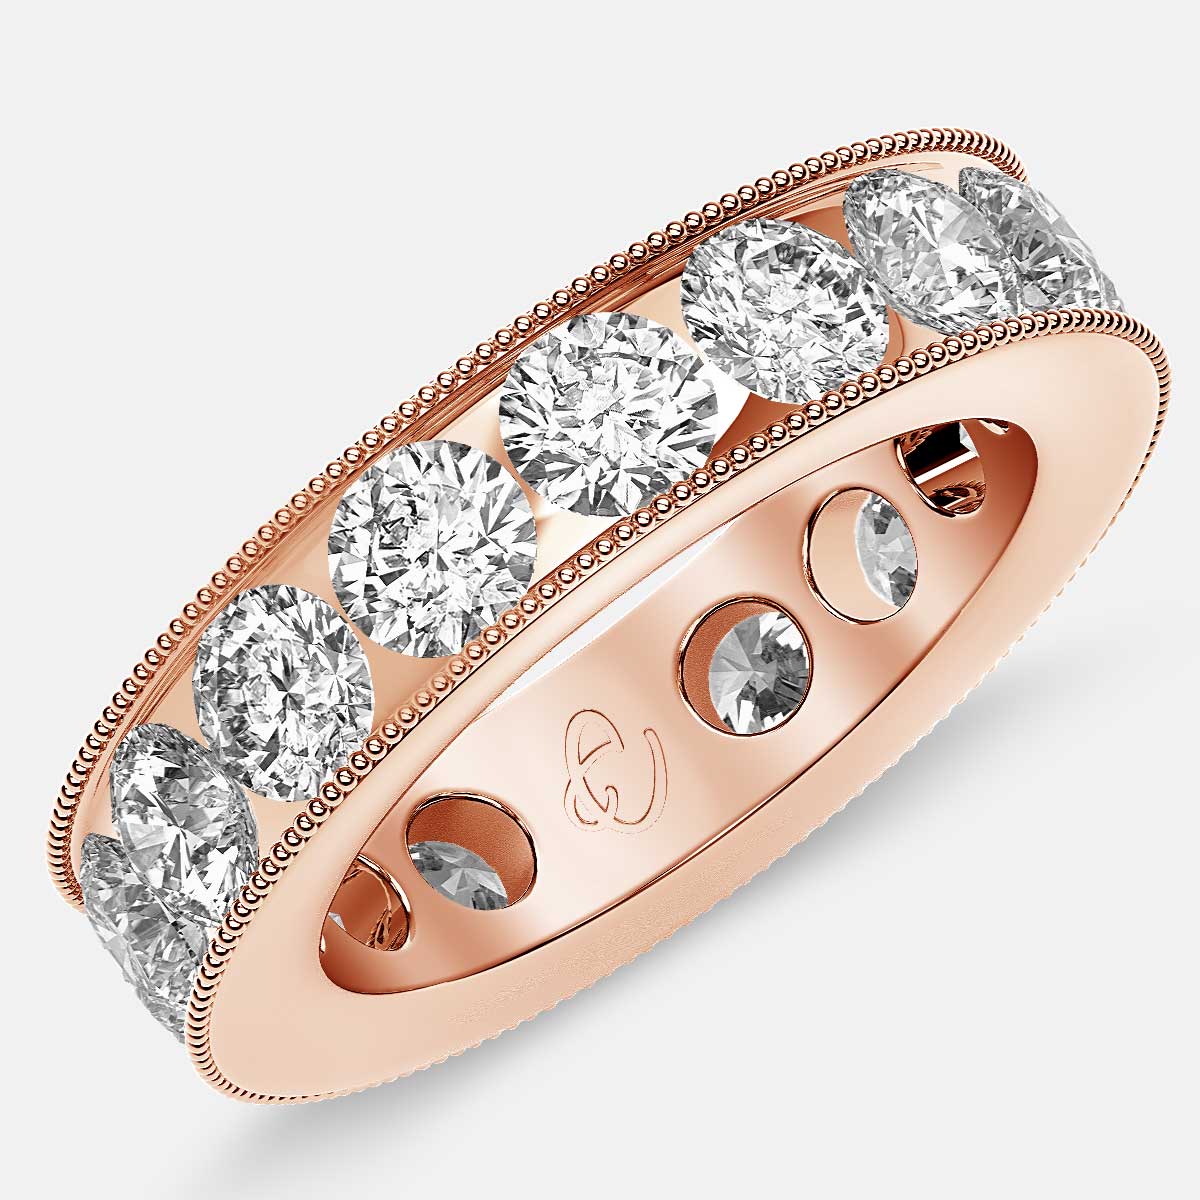 Channel Set Beaded Eternity Ring with Round Diamonds in 18k Rose Gold